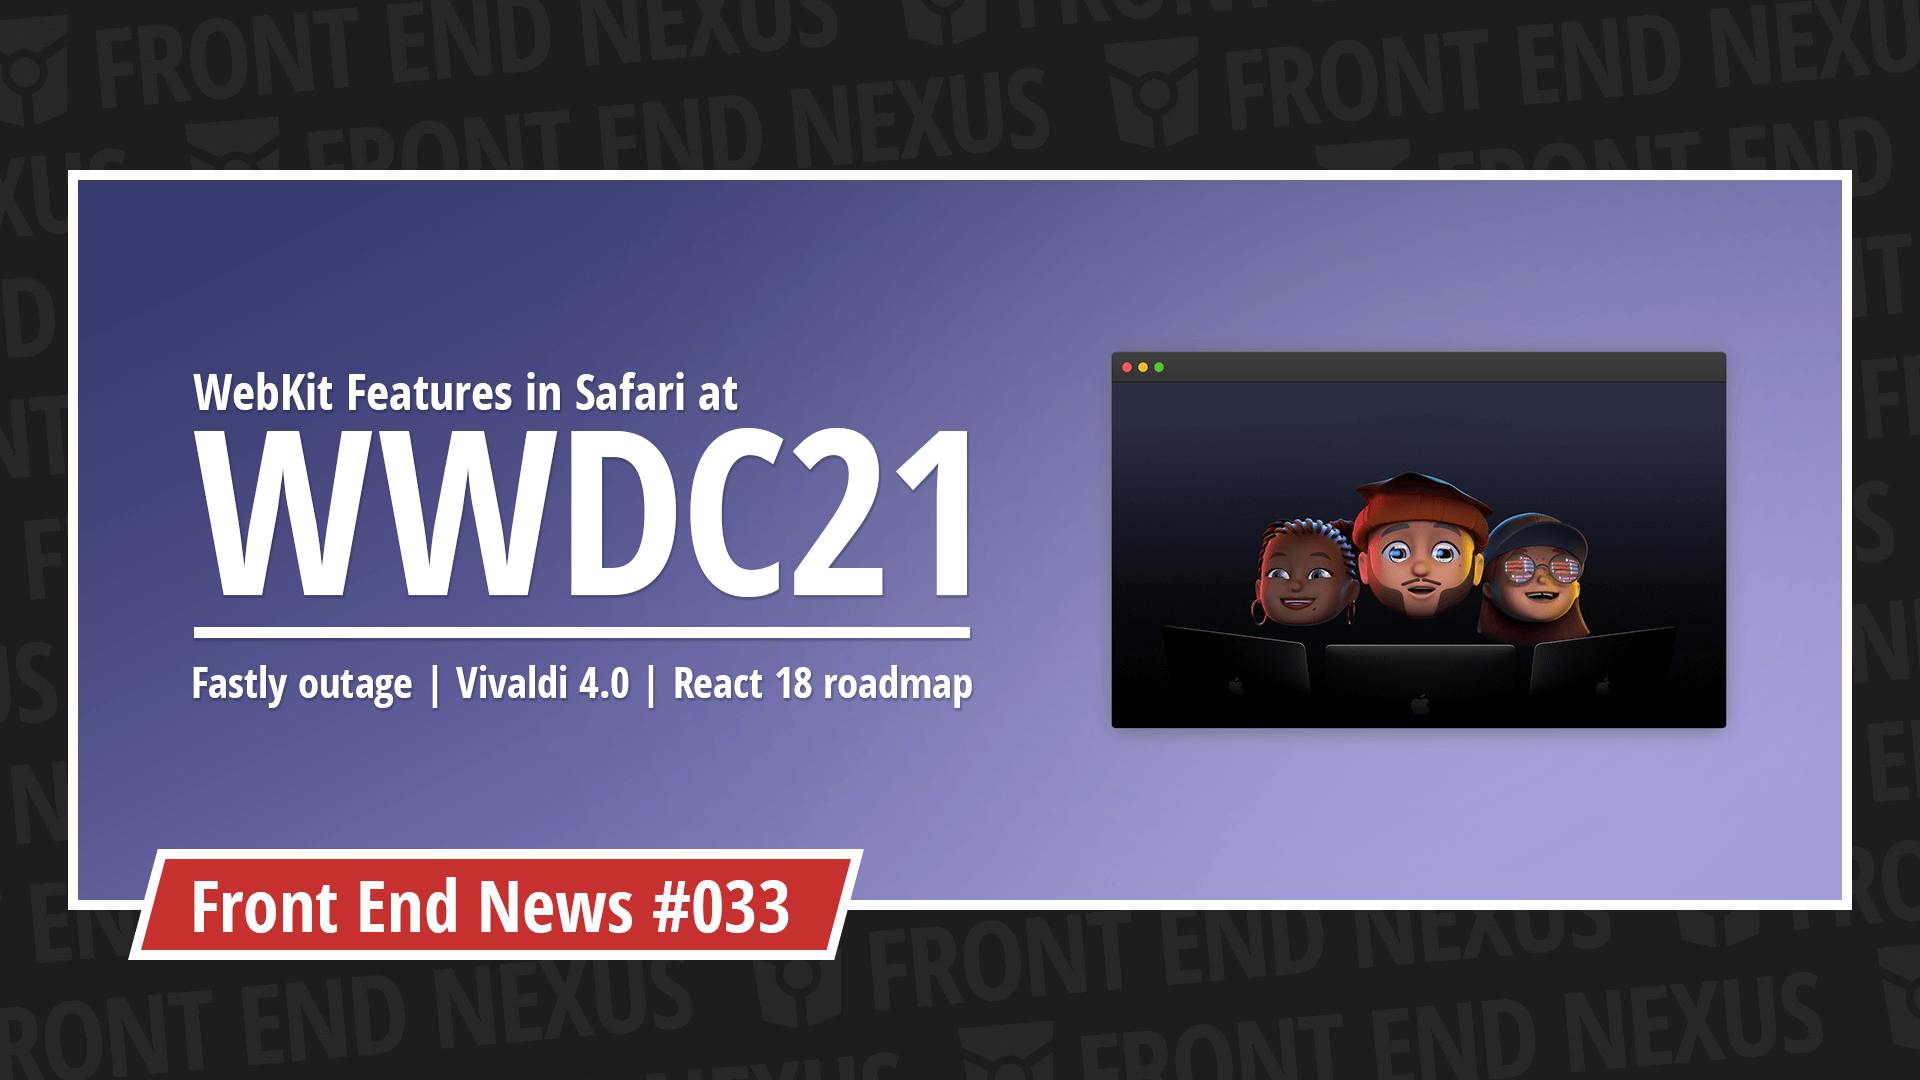 WebKit Features in Safari at WWDC21, Fastly CDN outage, and Vivaldi 4.0 | Front End News #033